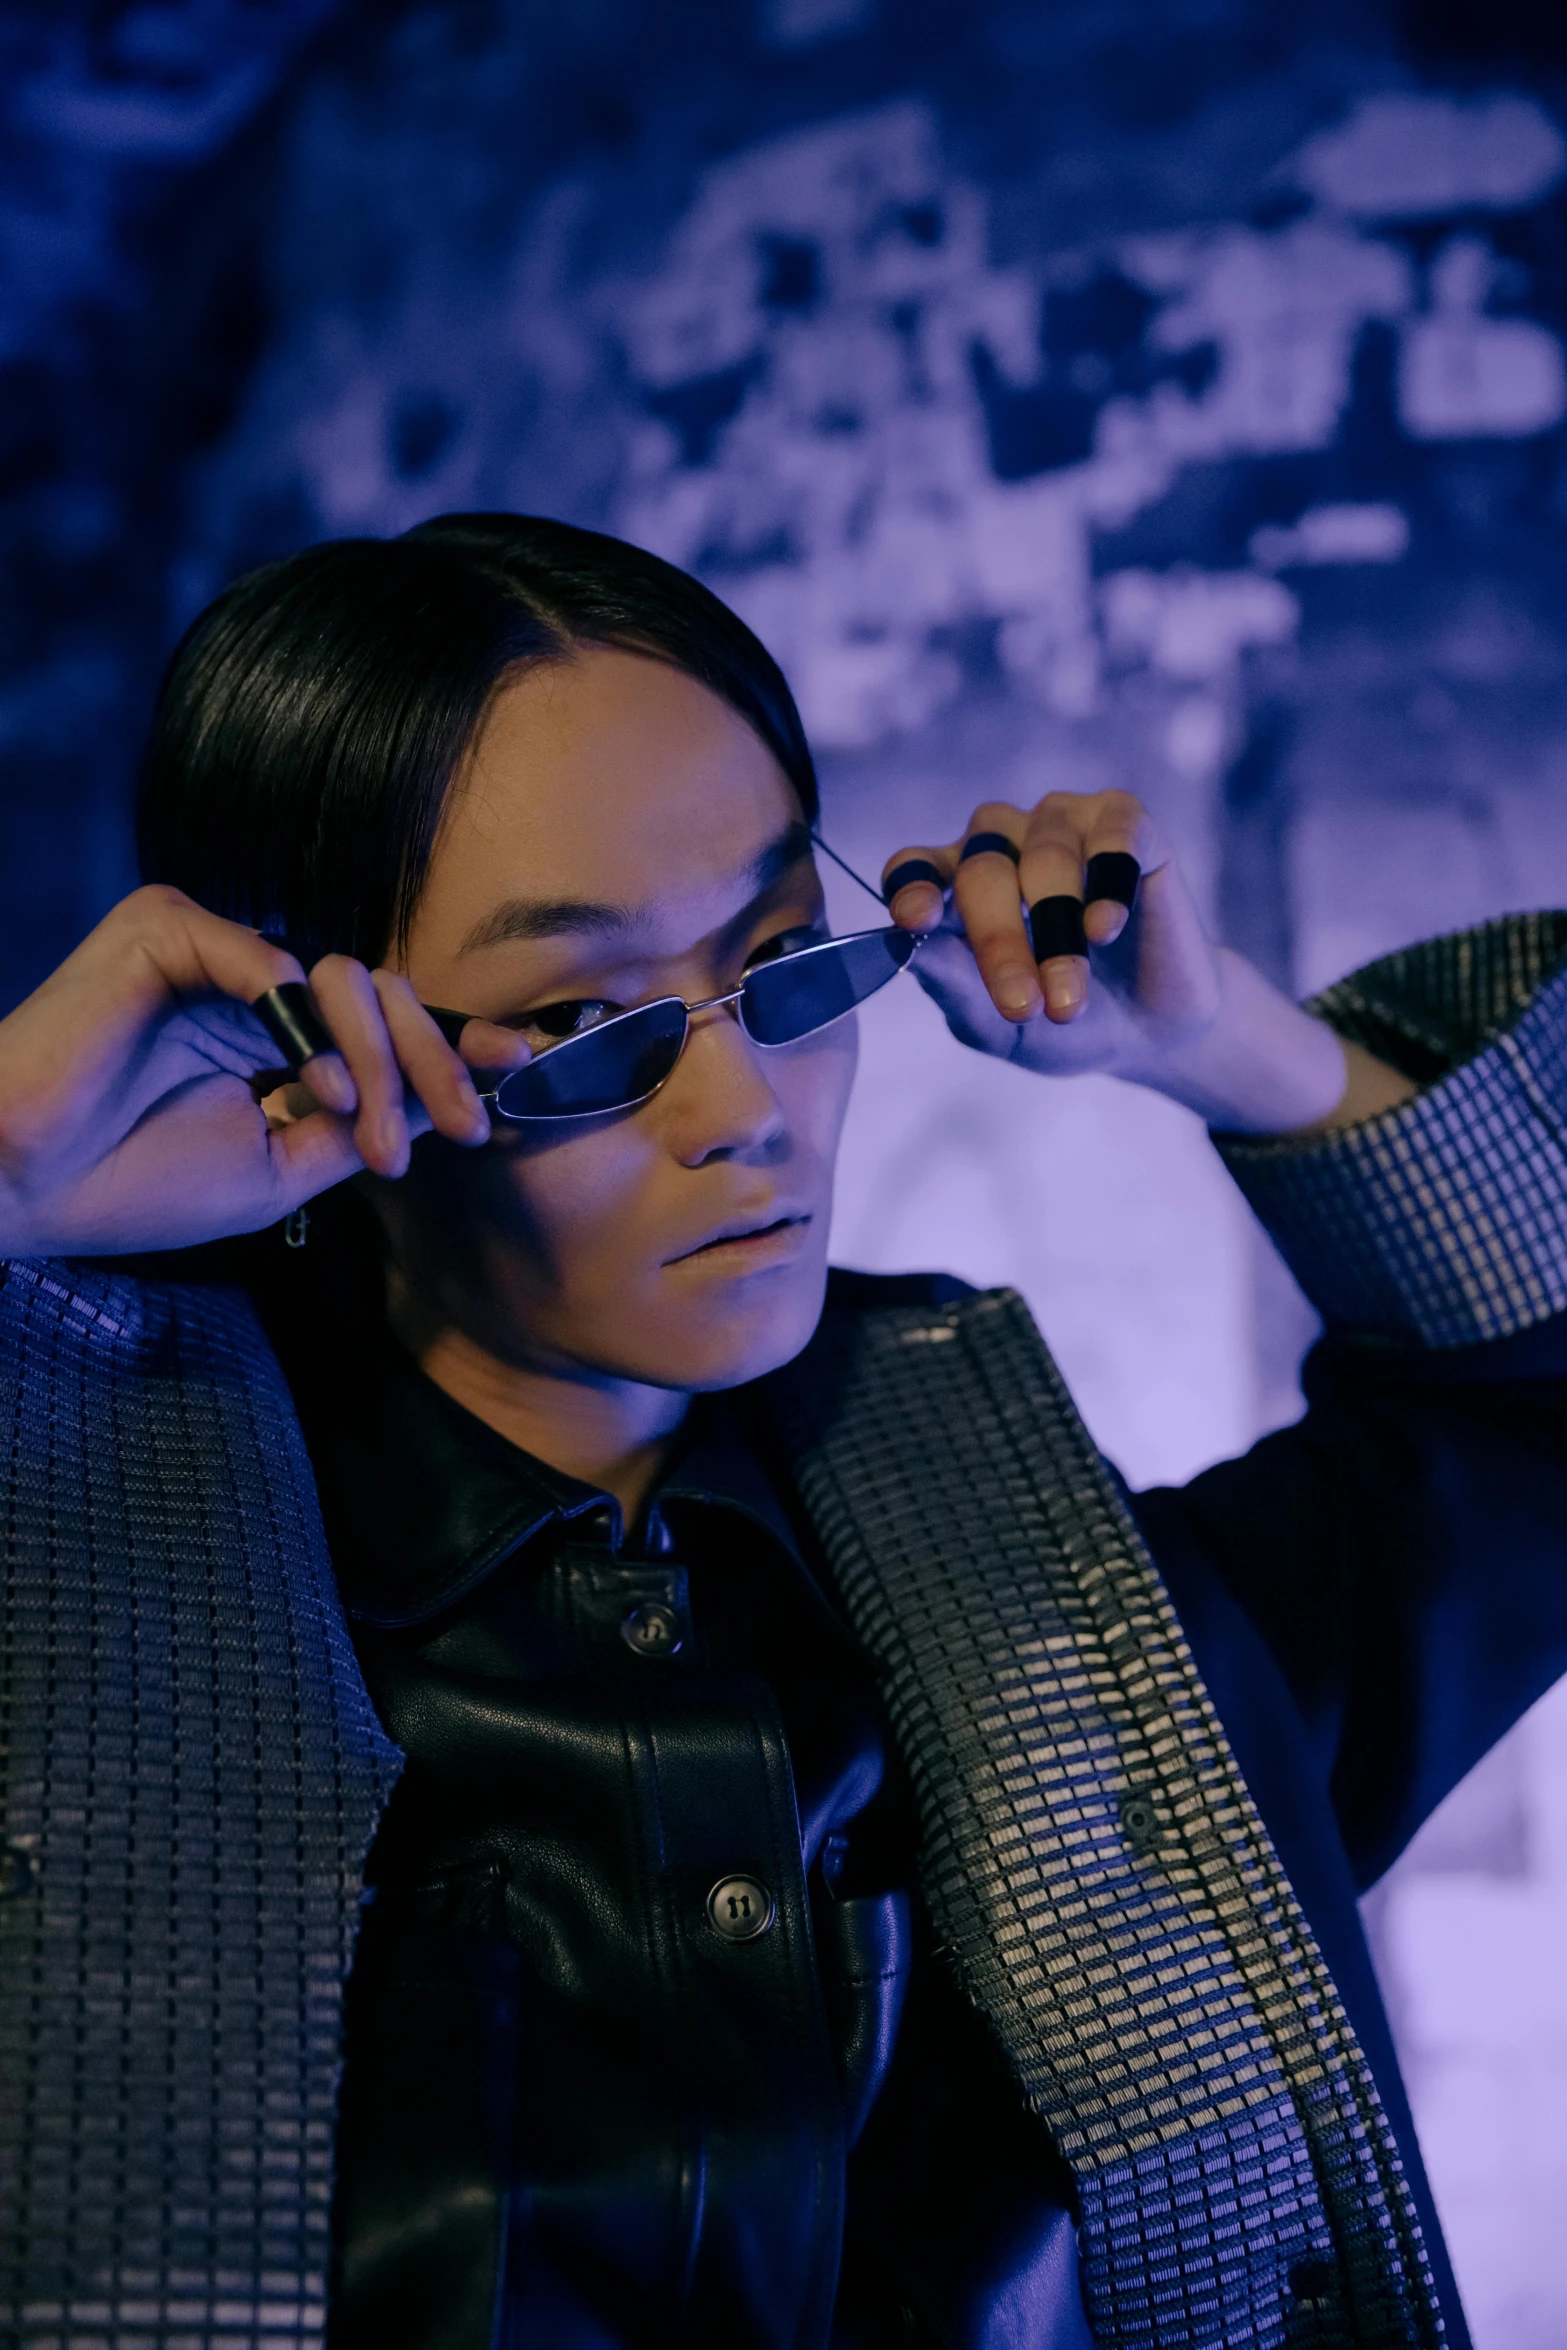 a close up of a person wearing sunglasses, inspired by Zhu Da, visual art, wearing futuristic clothing, krystal, battle pose, shot with sony alpha